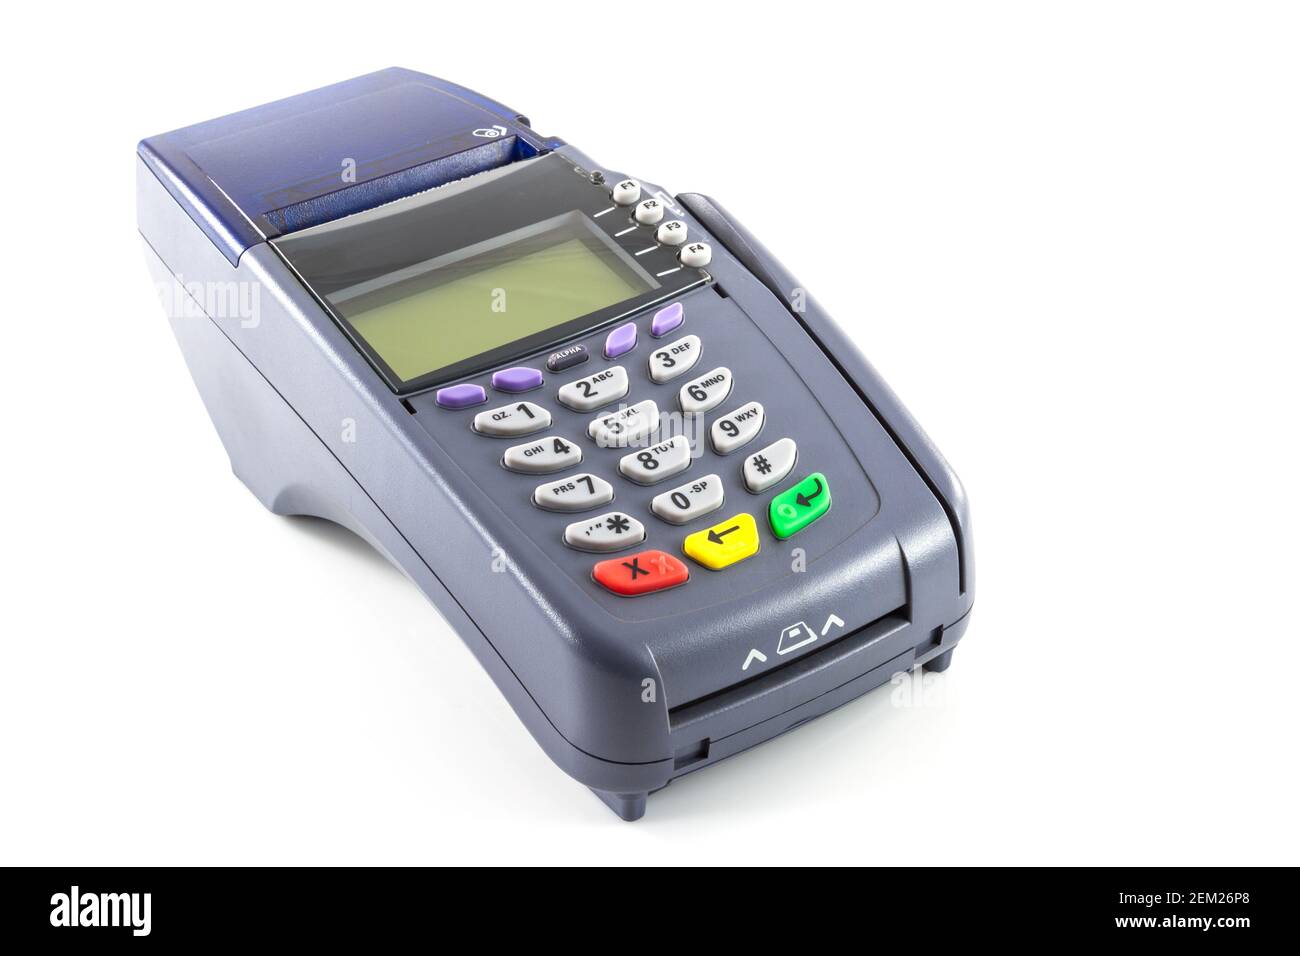 67,000+ Credit Card Machine Pictures